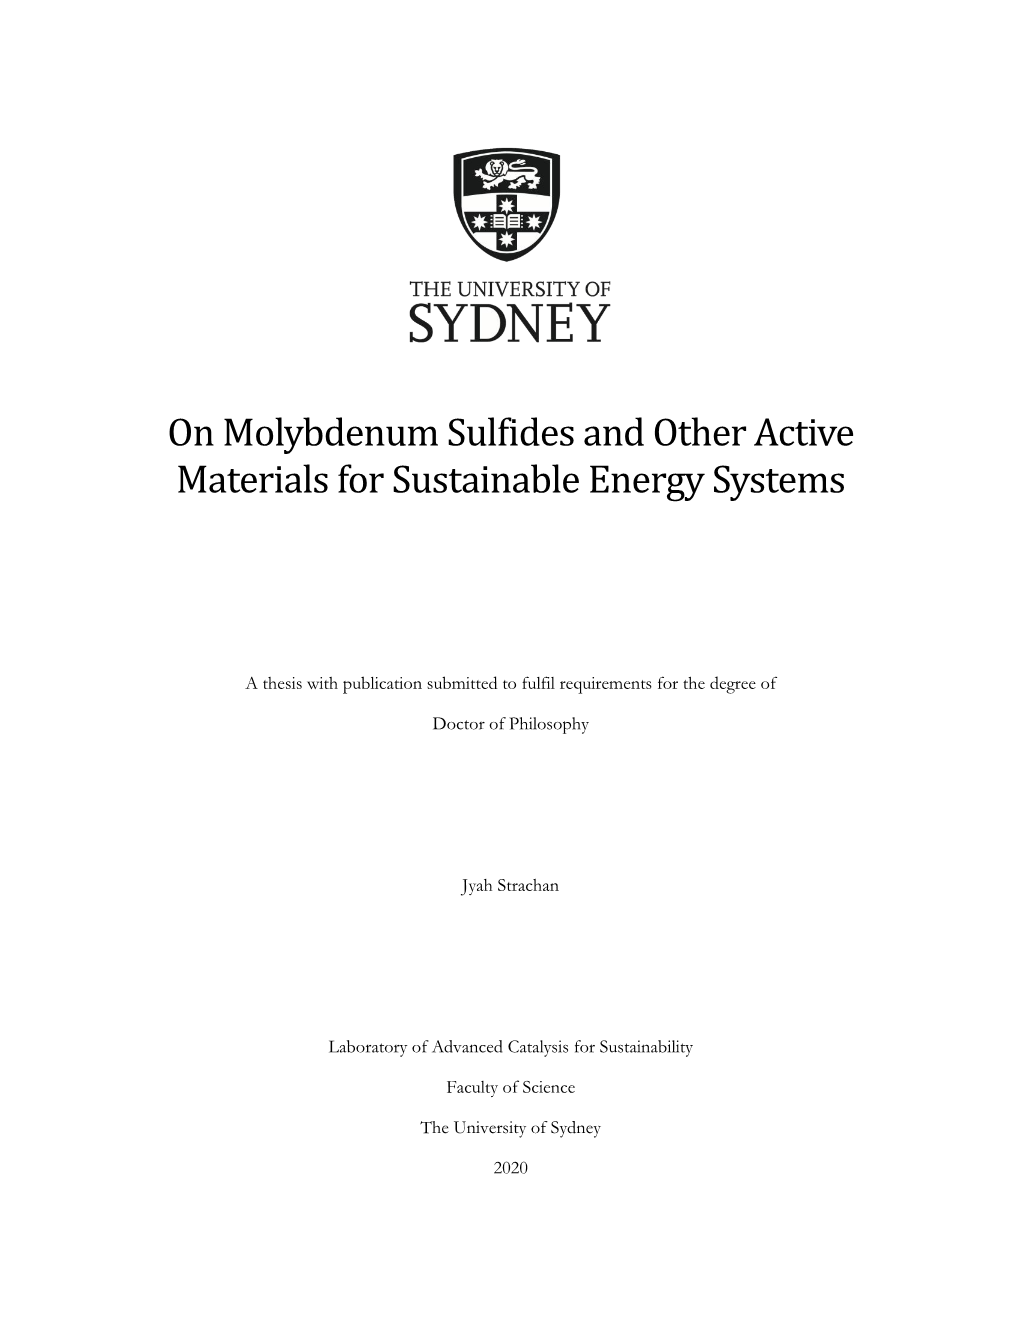 On Molybdenum Sulfides and Other Active Materials for Sustainable Energy Systems